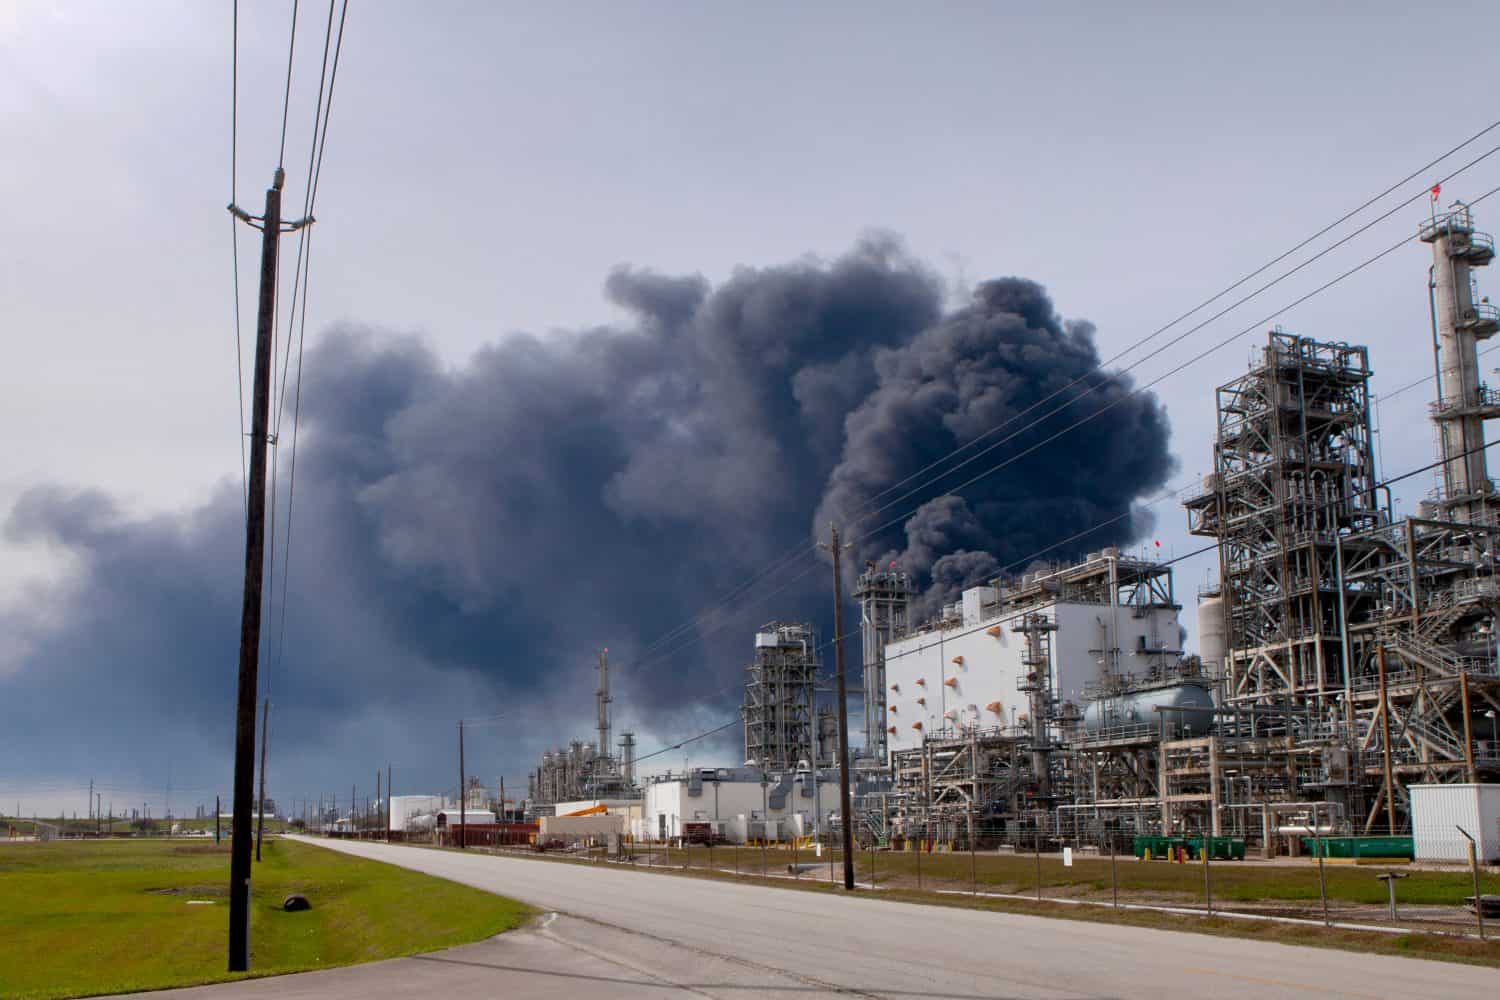 A large storage tank fire at Intercontinental Terminals Company in Deer Park near Houston, Texas. The tanks on fire hold Naphtha and xylene